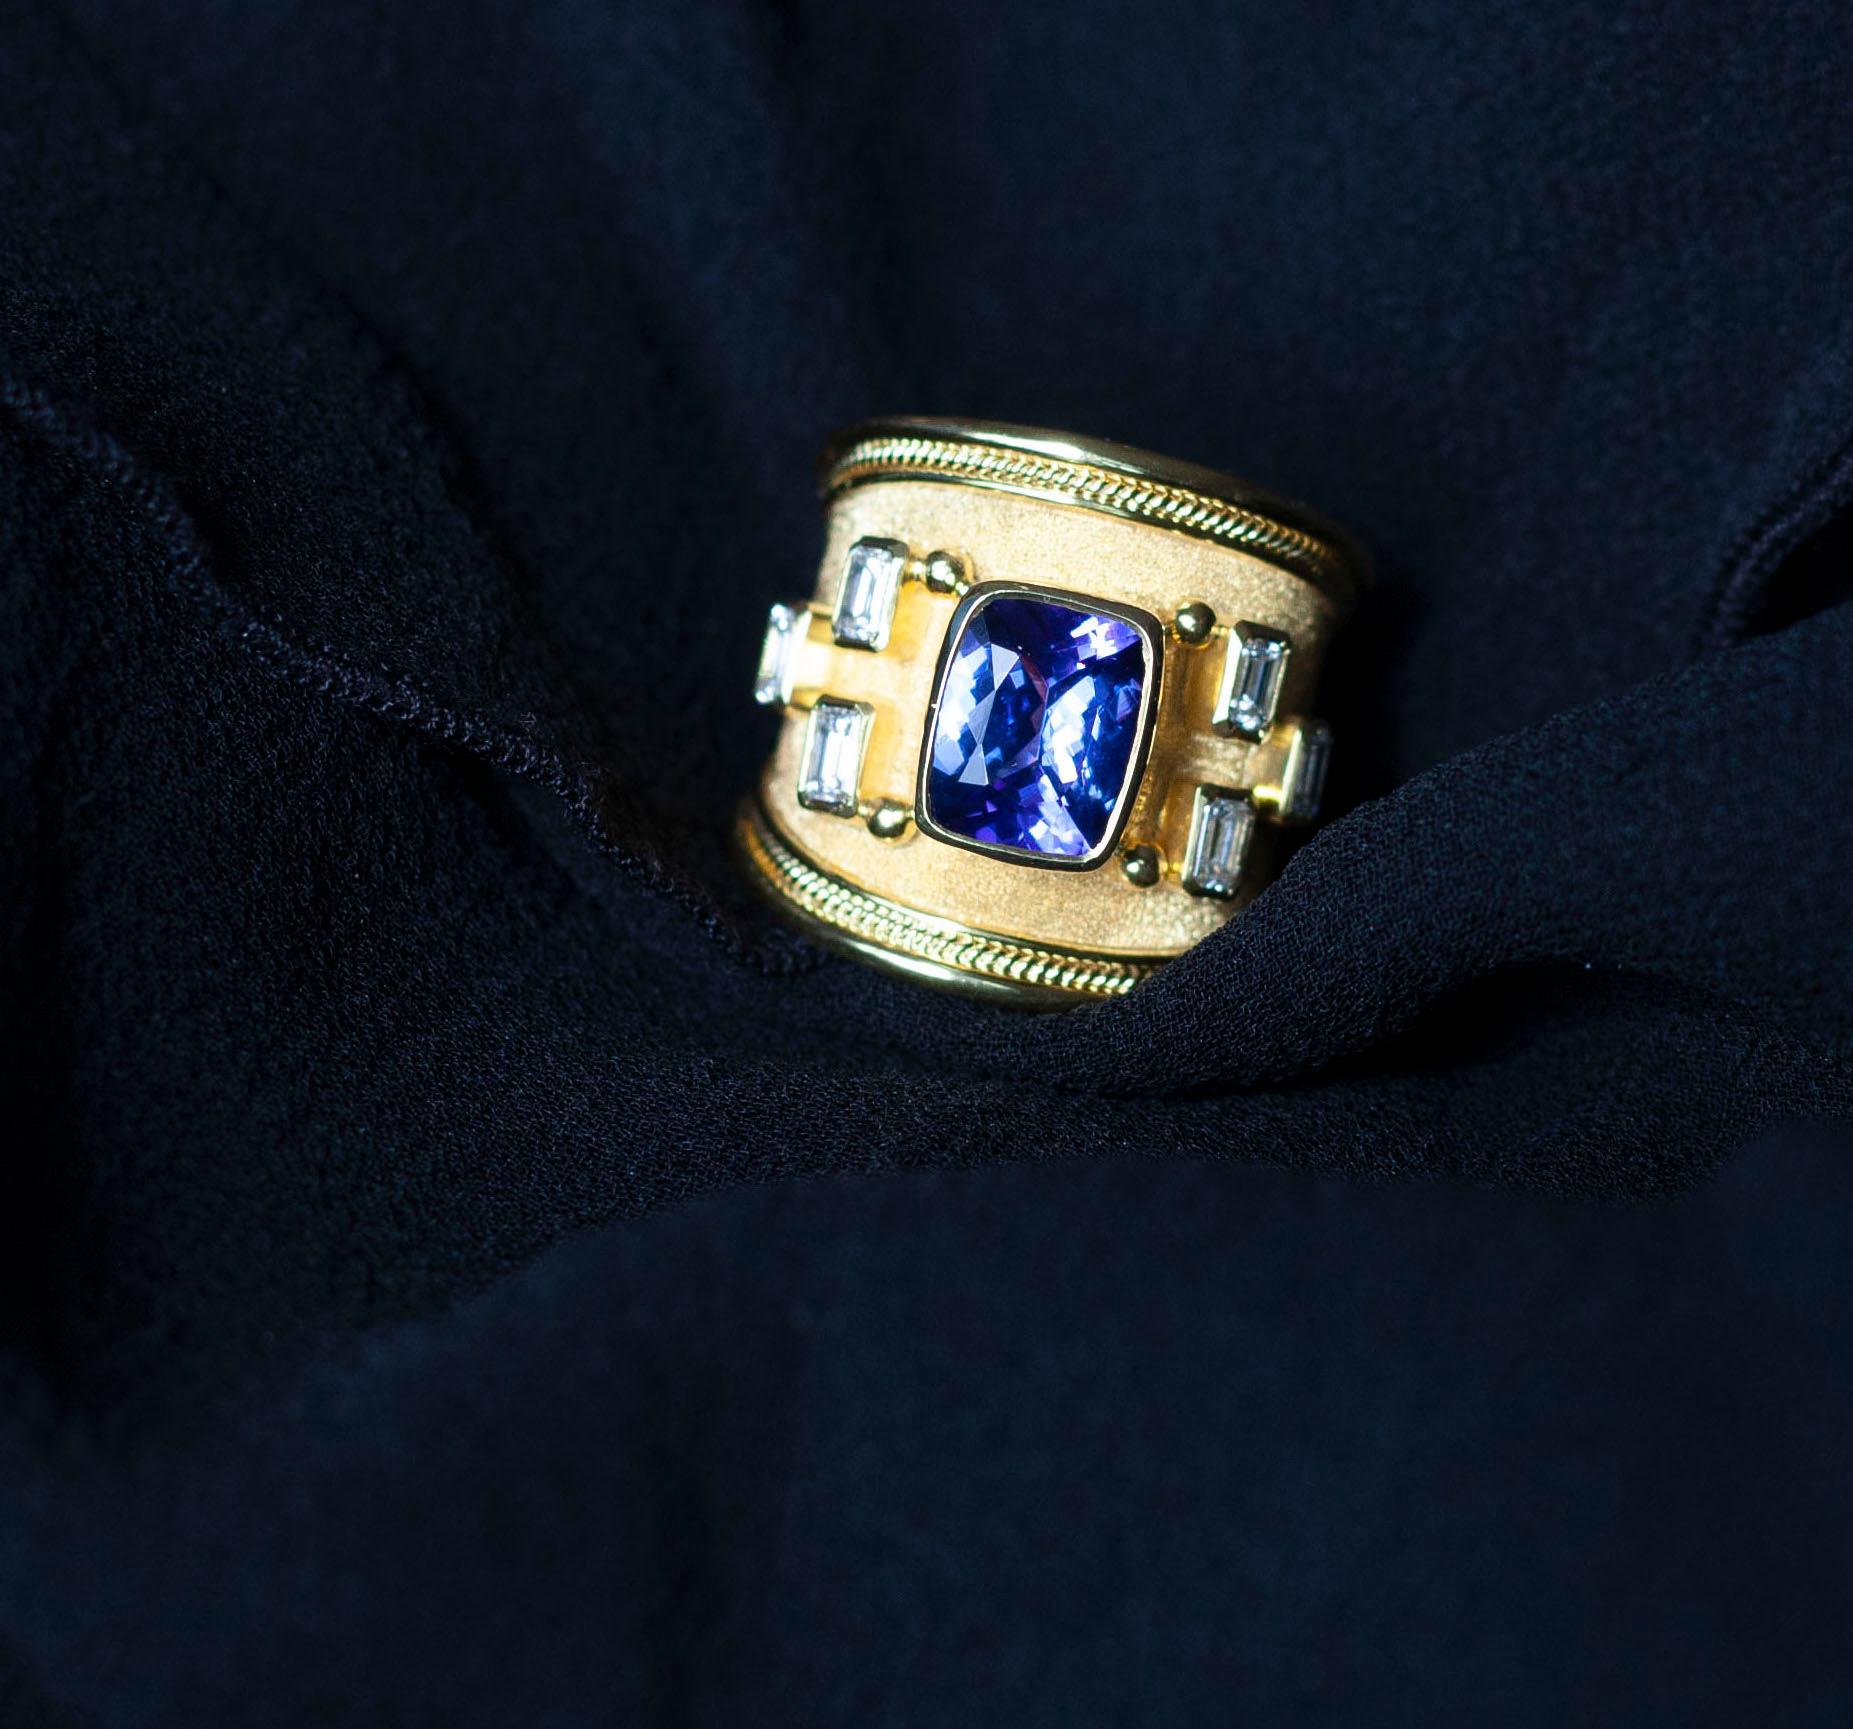 S.Georgios designer 18 Karat Yellow Gold Band Ring is all handmade with a Byzantine Granulation Workmanship and a unique velvet background. This gorgeous band features in the center a Cushion Cut Natural Tanzanite total weight of 3,48 Carats and 6